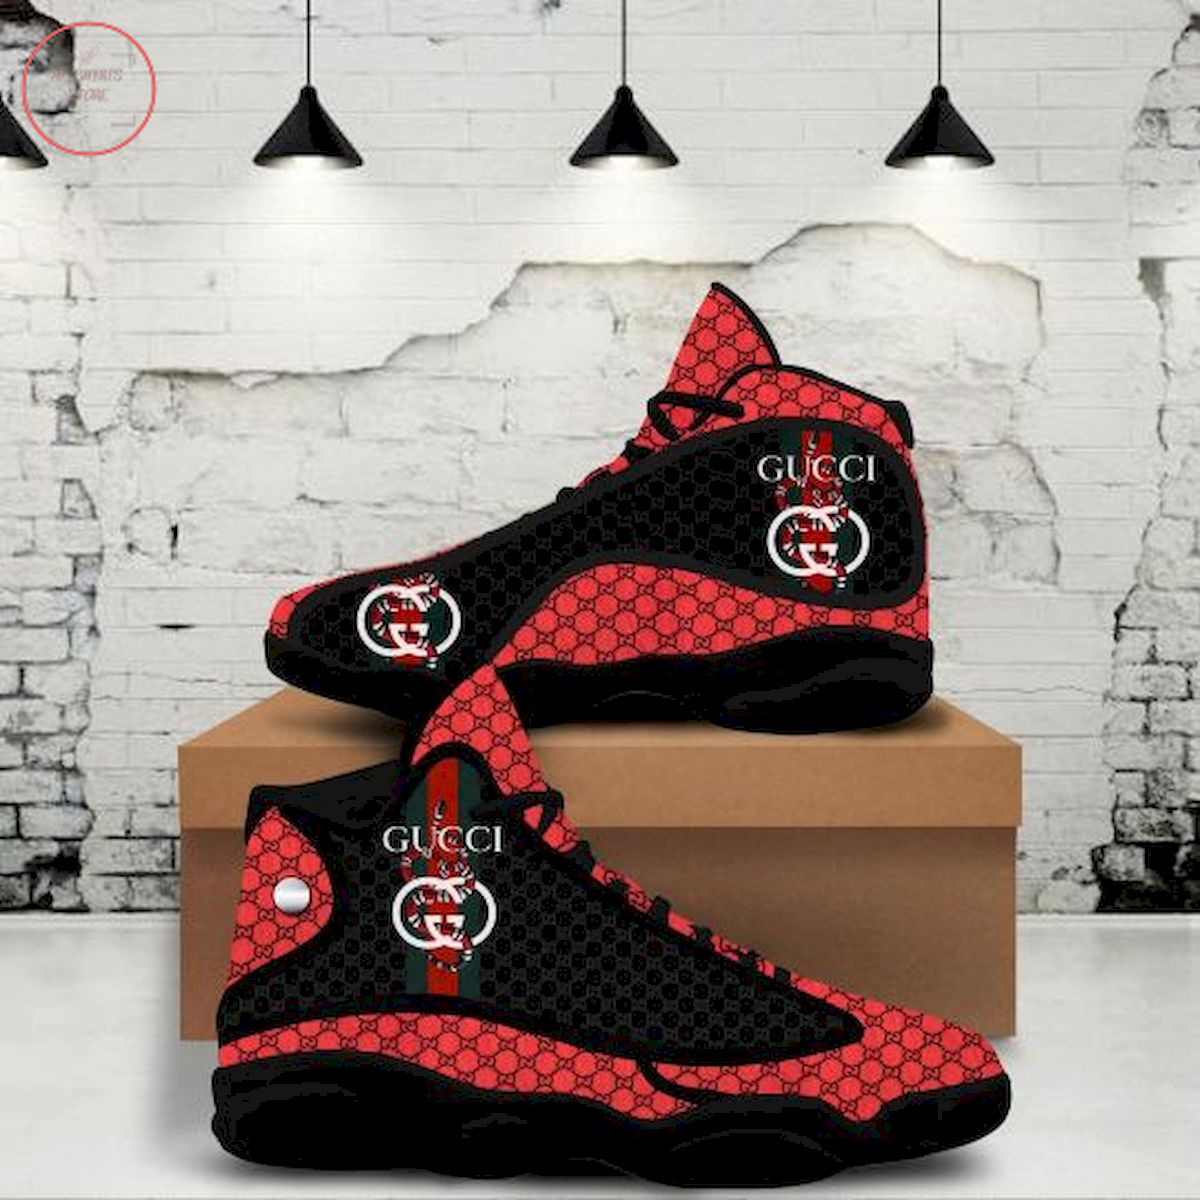 Gucci Snake Red and Black Air Jordan 13 Sneaker Shoes